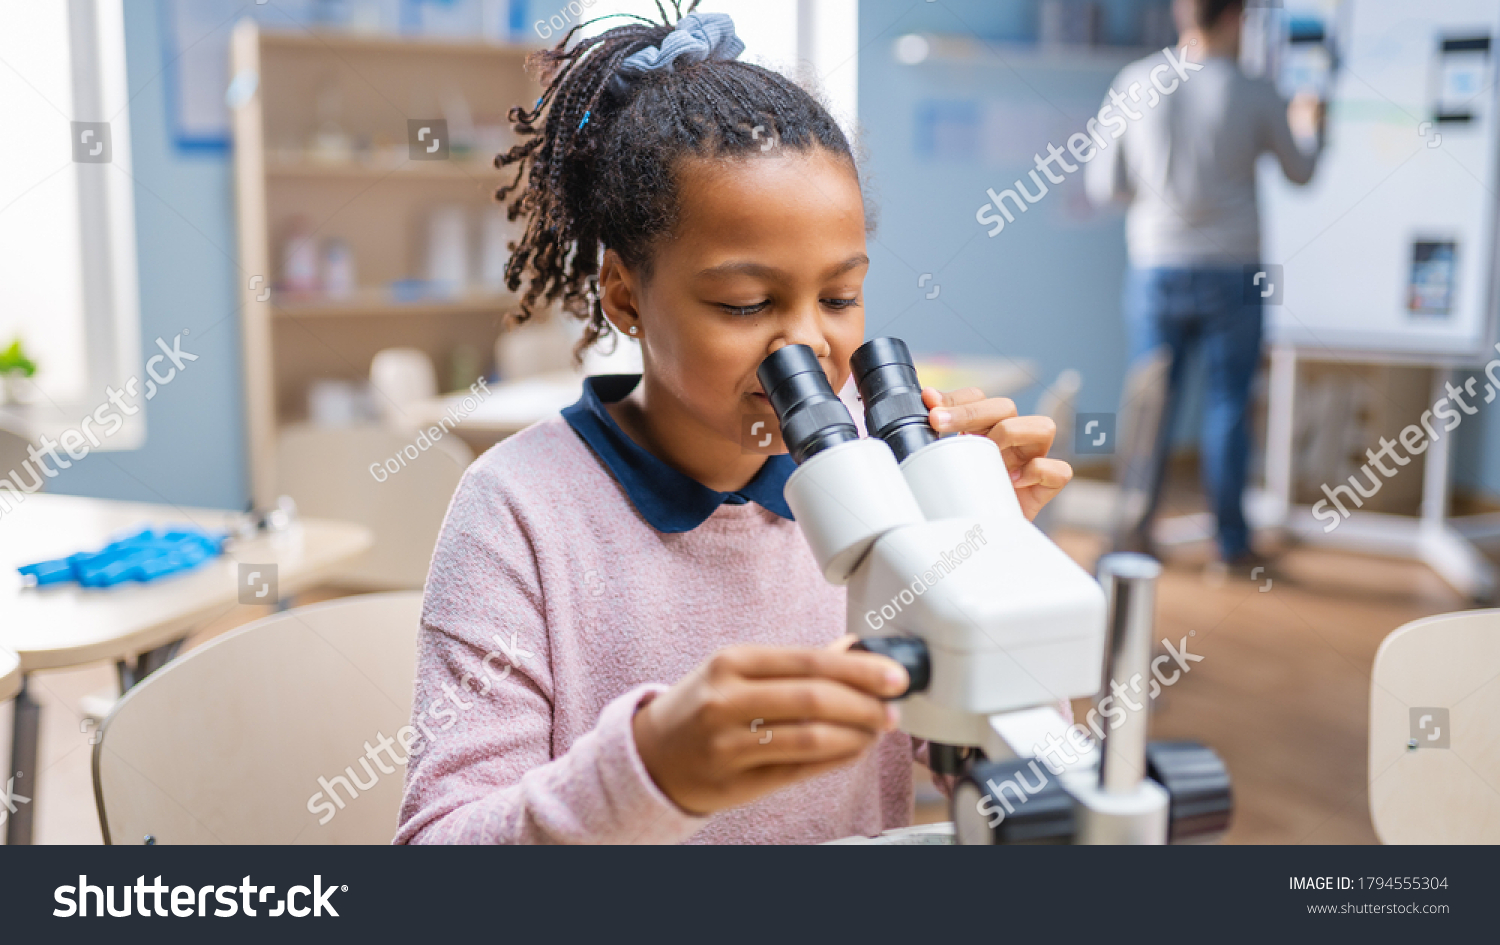 Portrait of Smart Little Schoolgirl Looking Under the Microscope. In Elementary School Classroom Cute Girl Uses Microscope. STEM (science, technology, engineering and mathematics) Education Program #1794555304